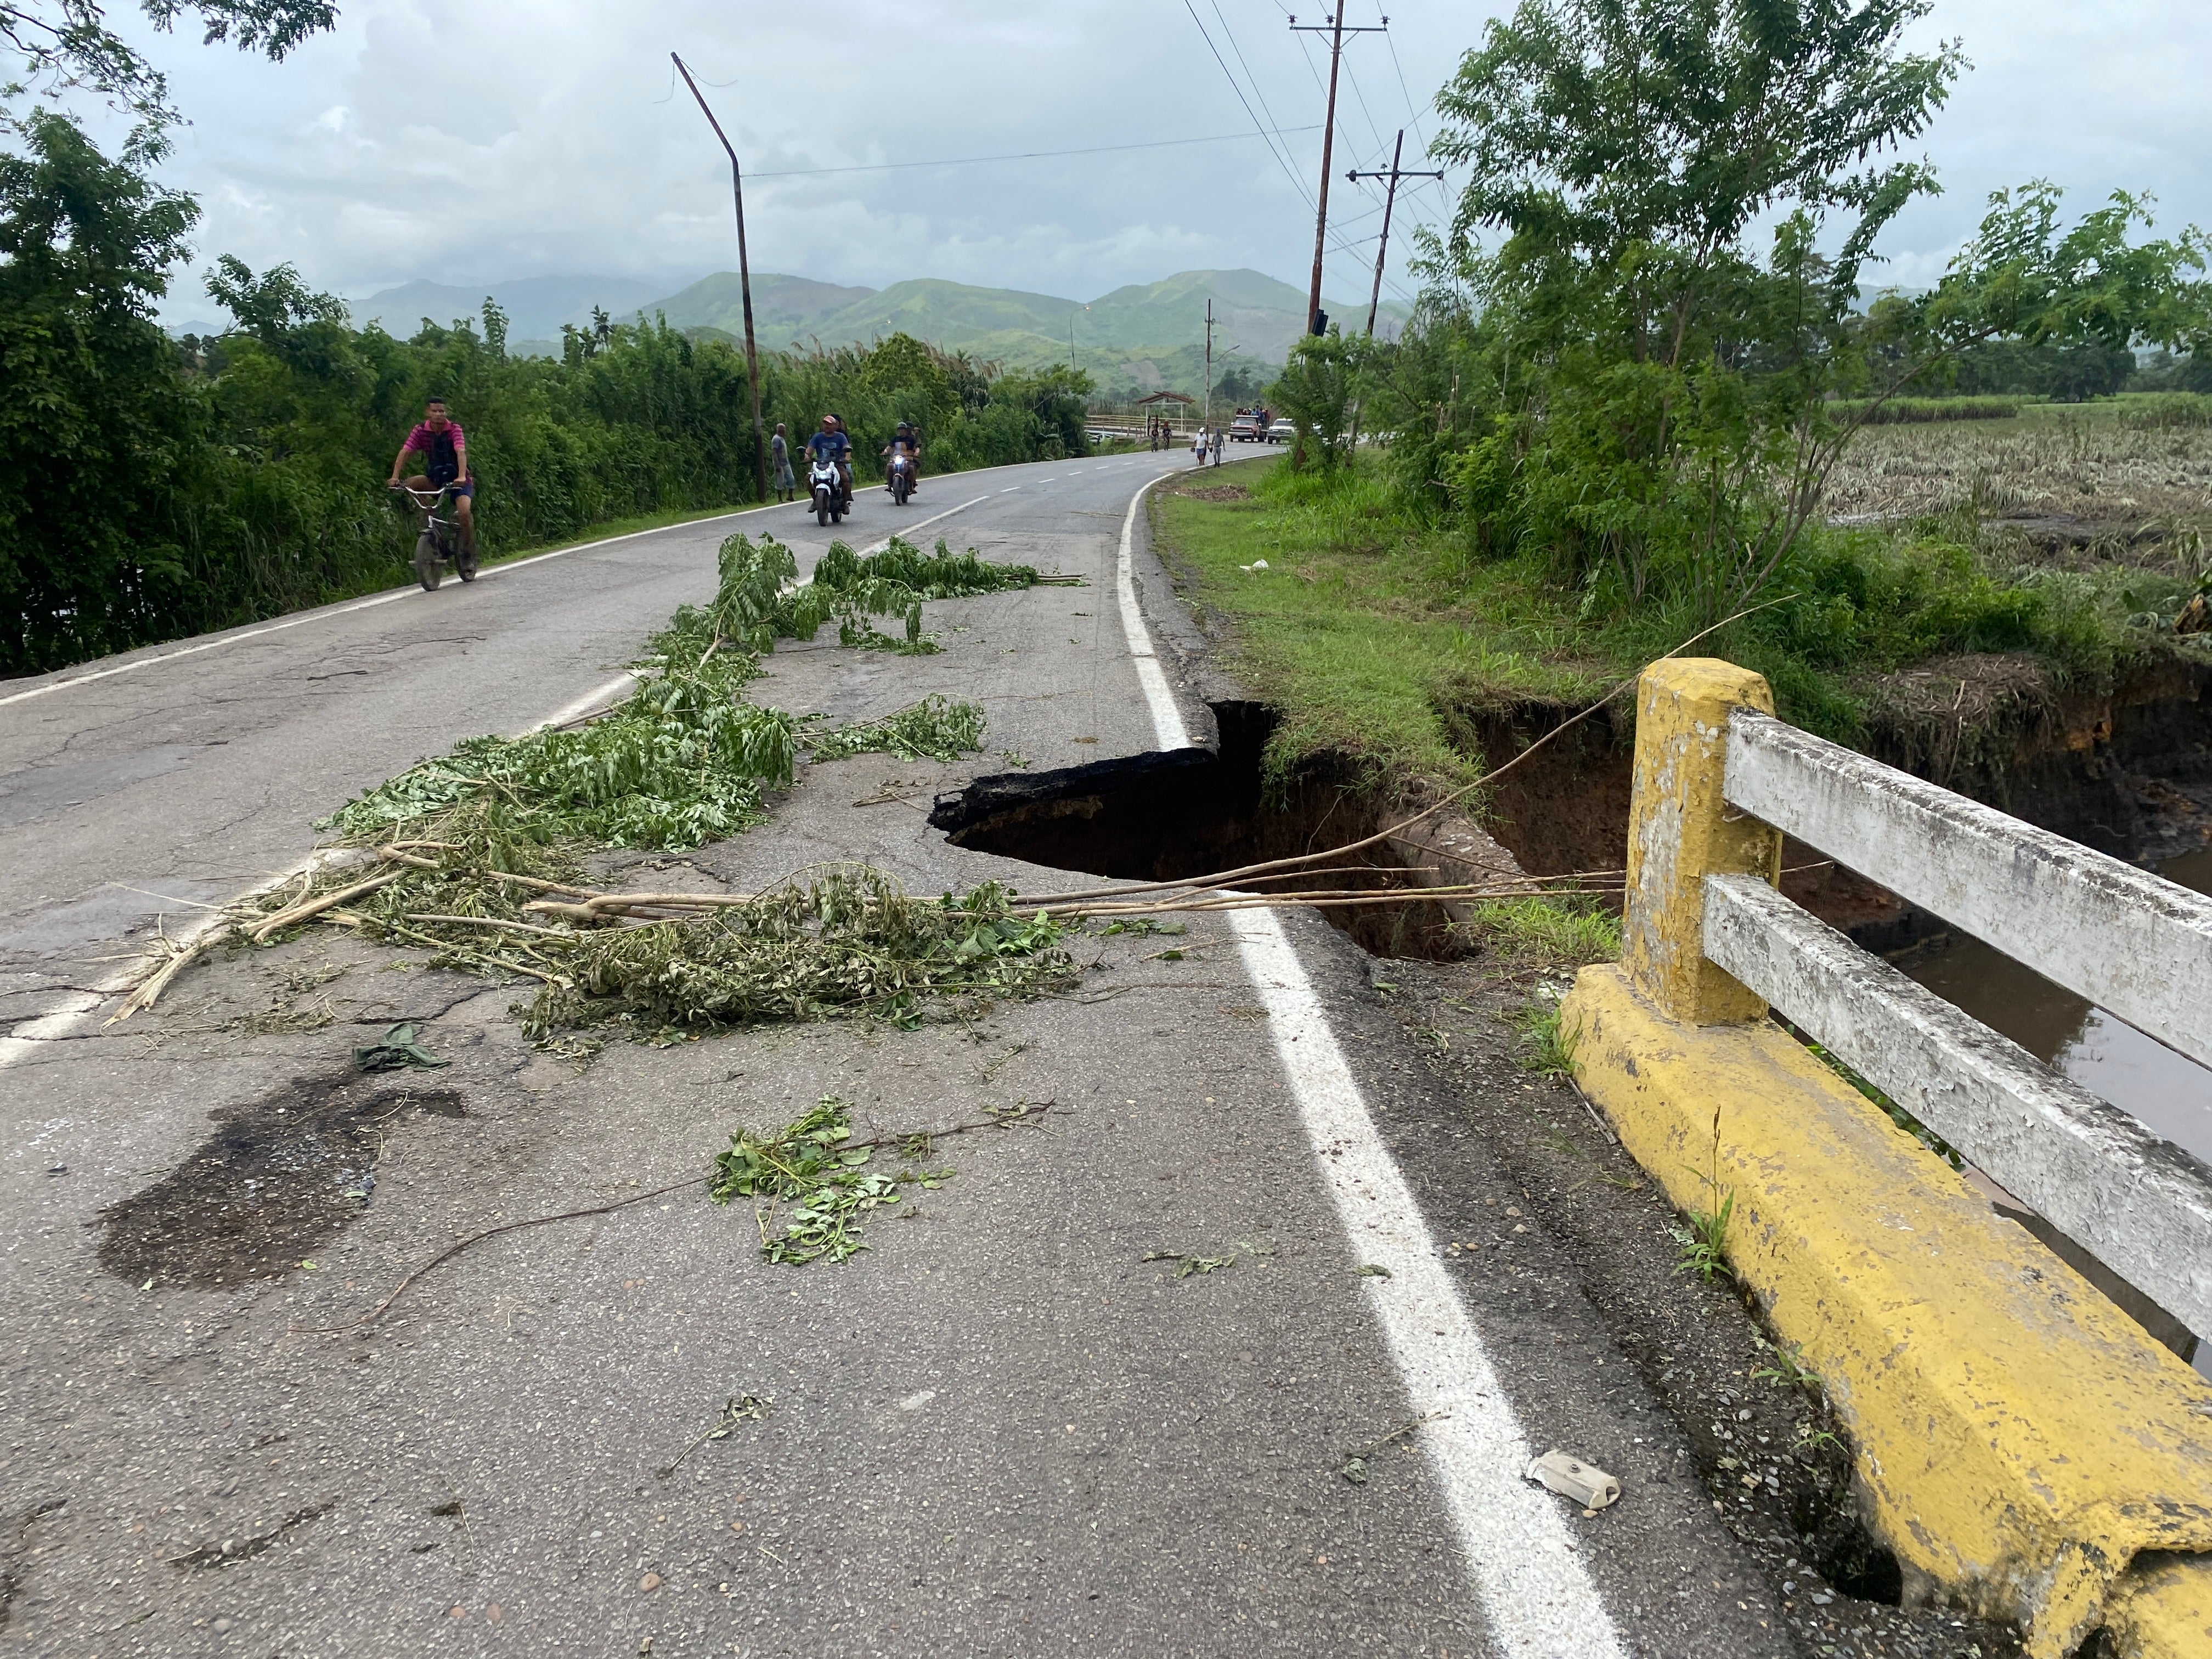 View of a damaged road after a river swelled due to heavy rains following the passage of Hurricane Beryl in Cumanacoa, Sucre State, Venezuela